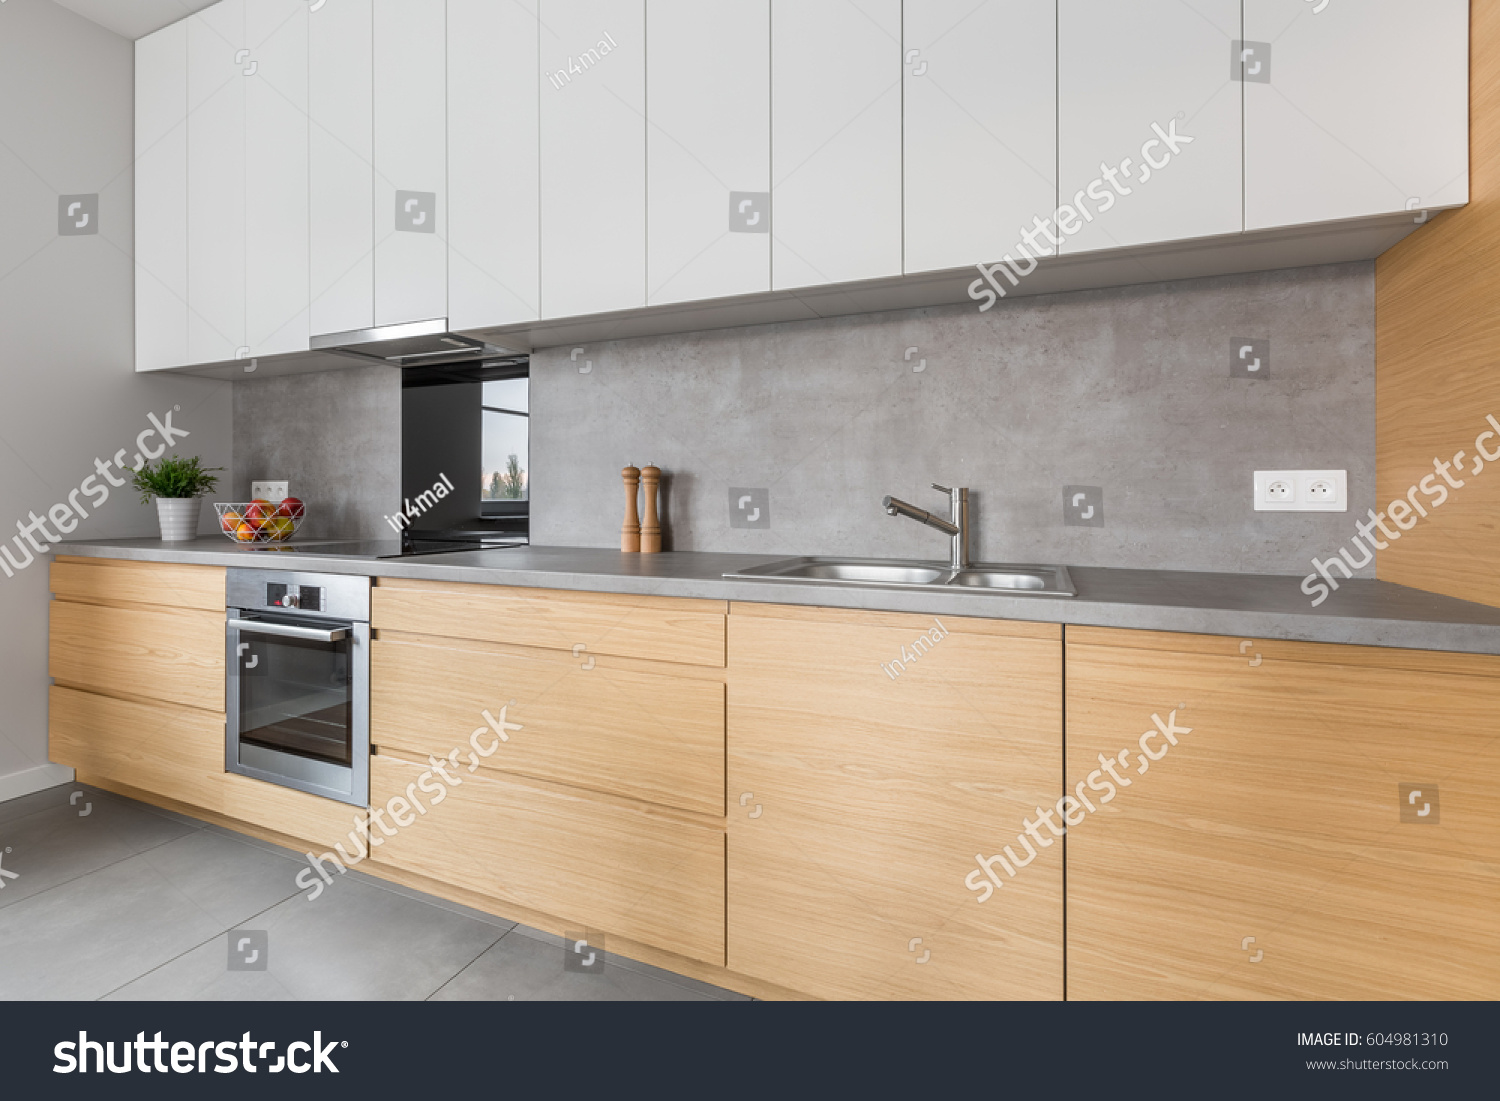 stock-photo-two-colored-kitchen-furniture-with-concrete-worktop-and-steel-appliances-604981310.jpg